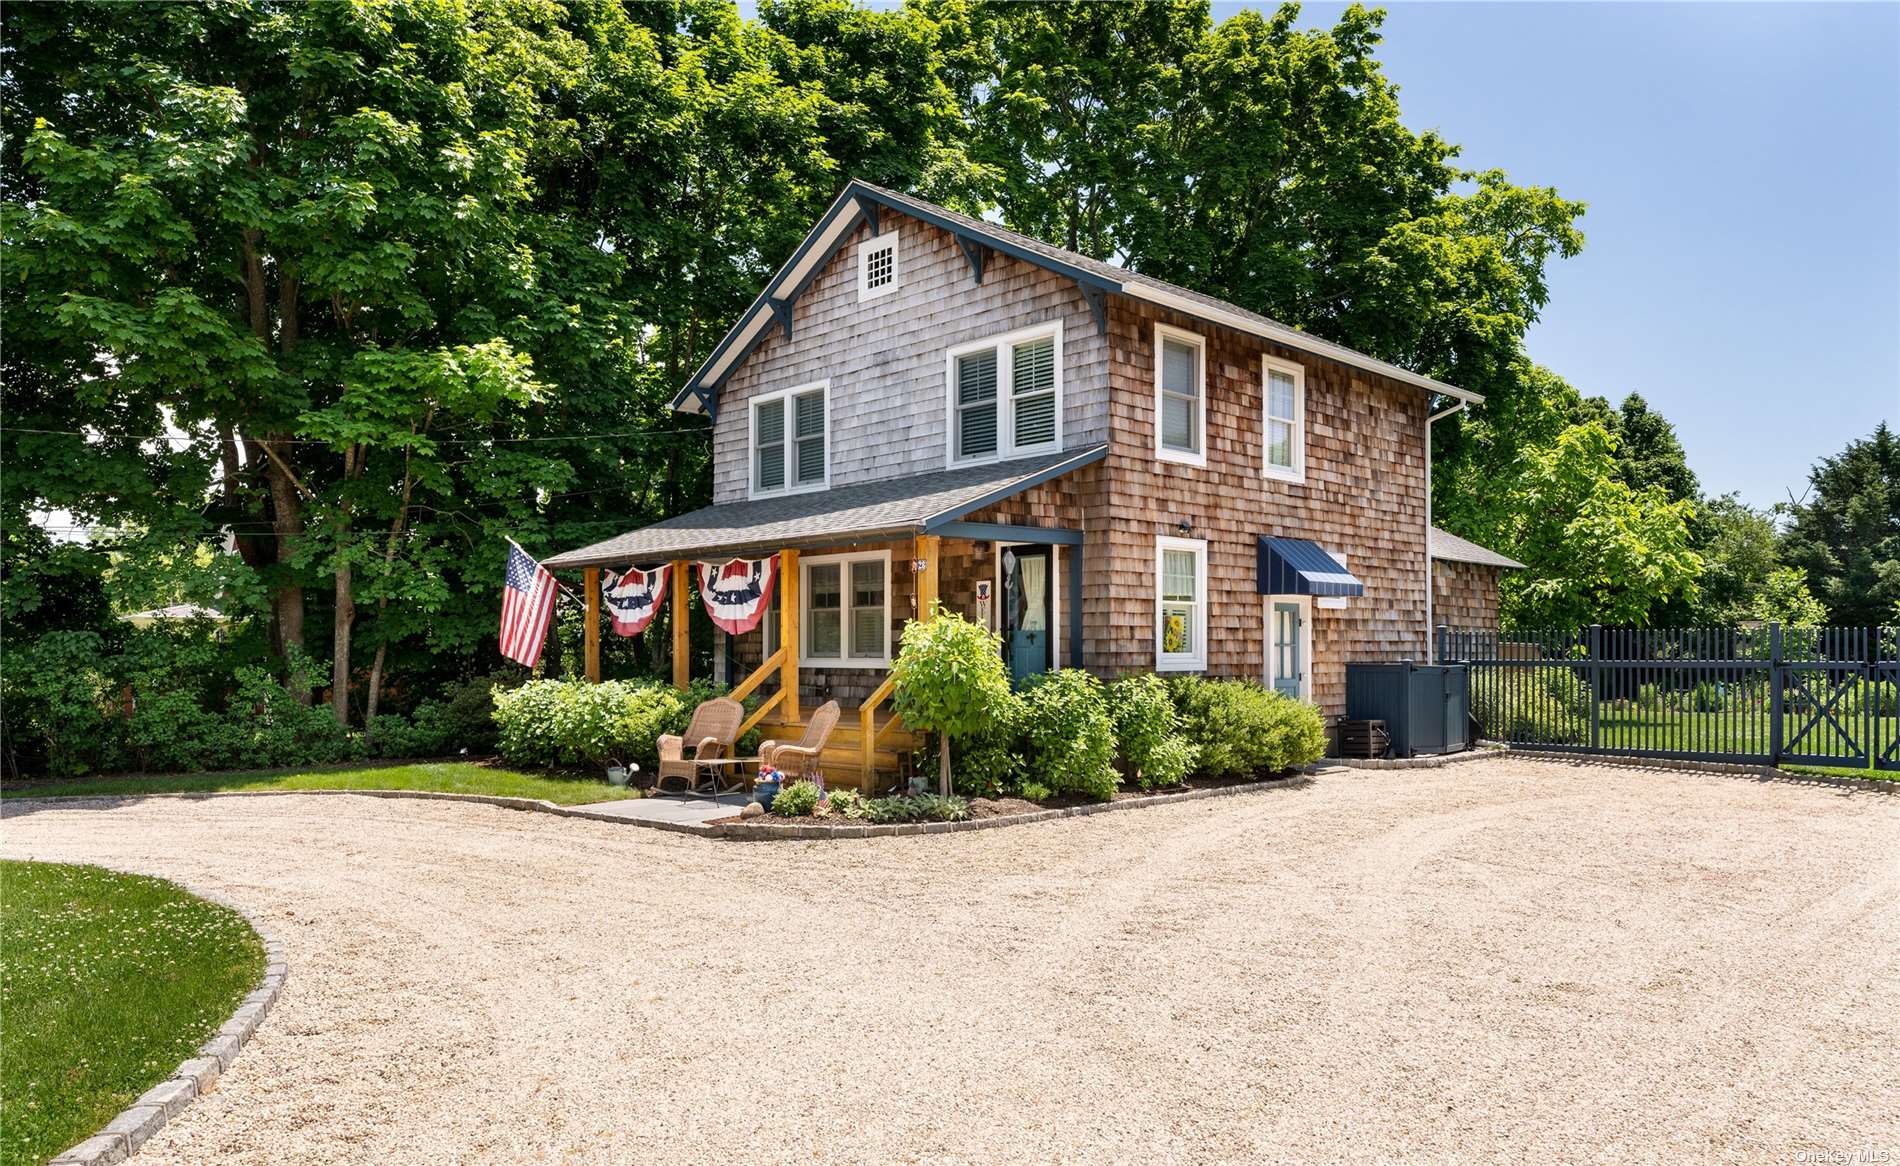 Listing in East Quogue, NY